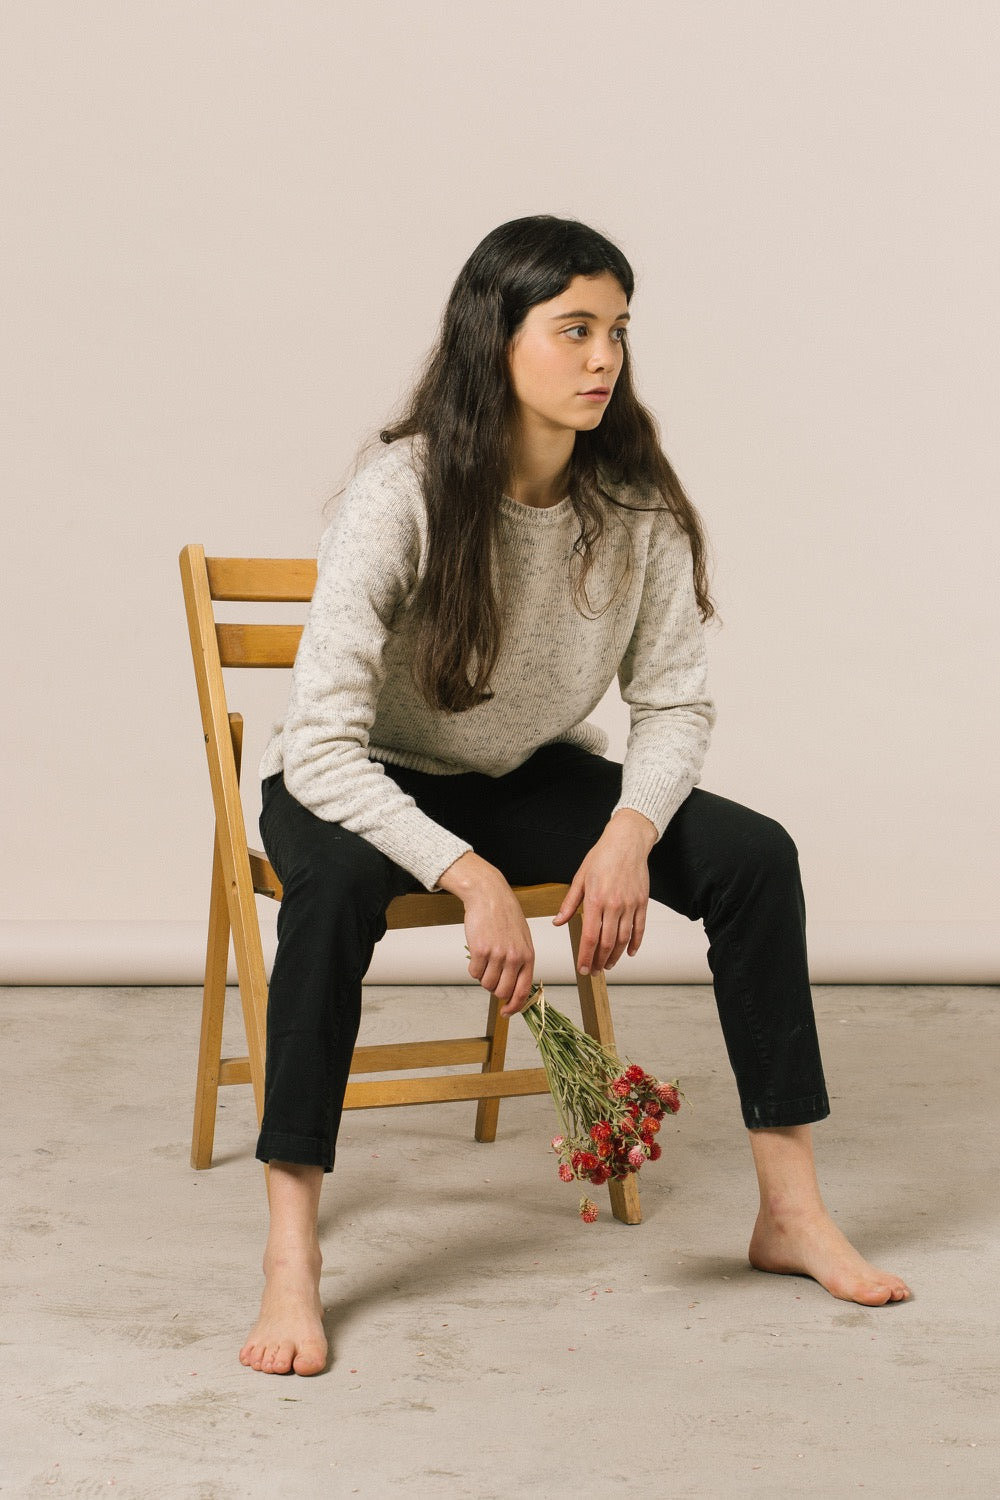 Model sitting on a wooden chair with red flowers in her hand.